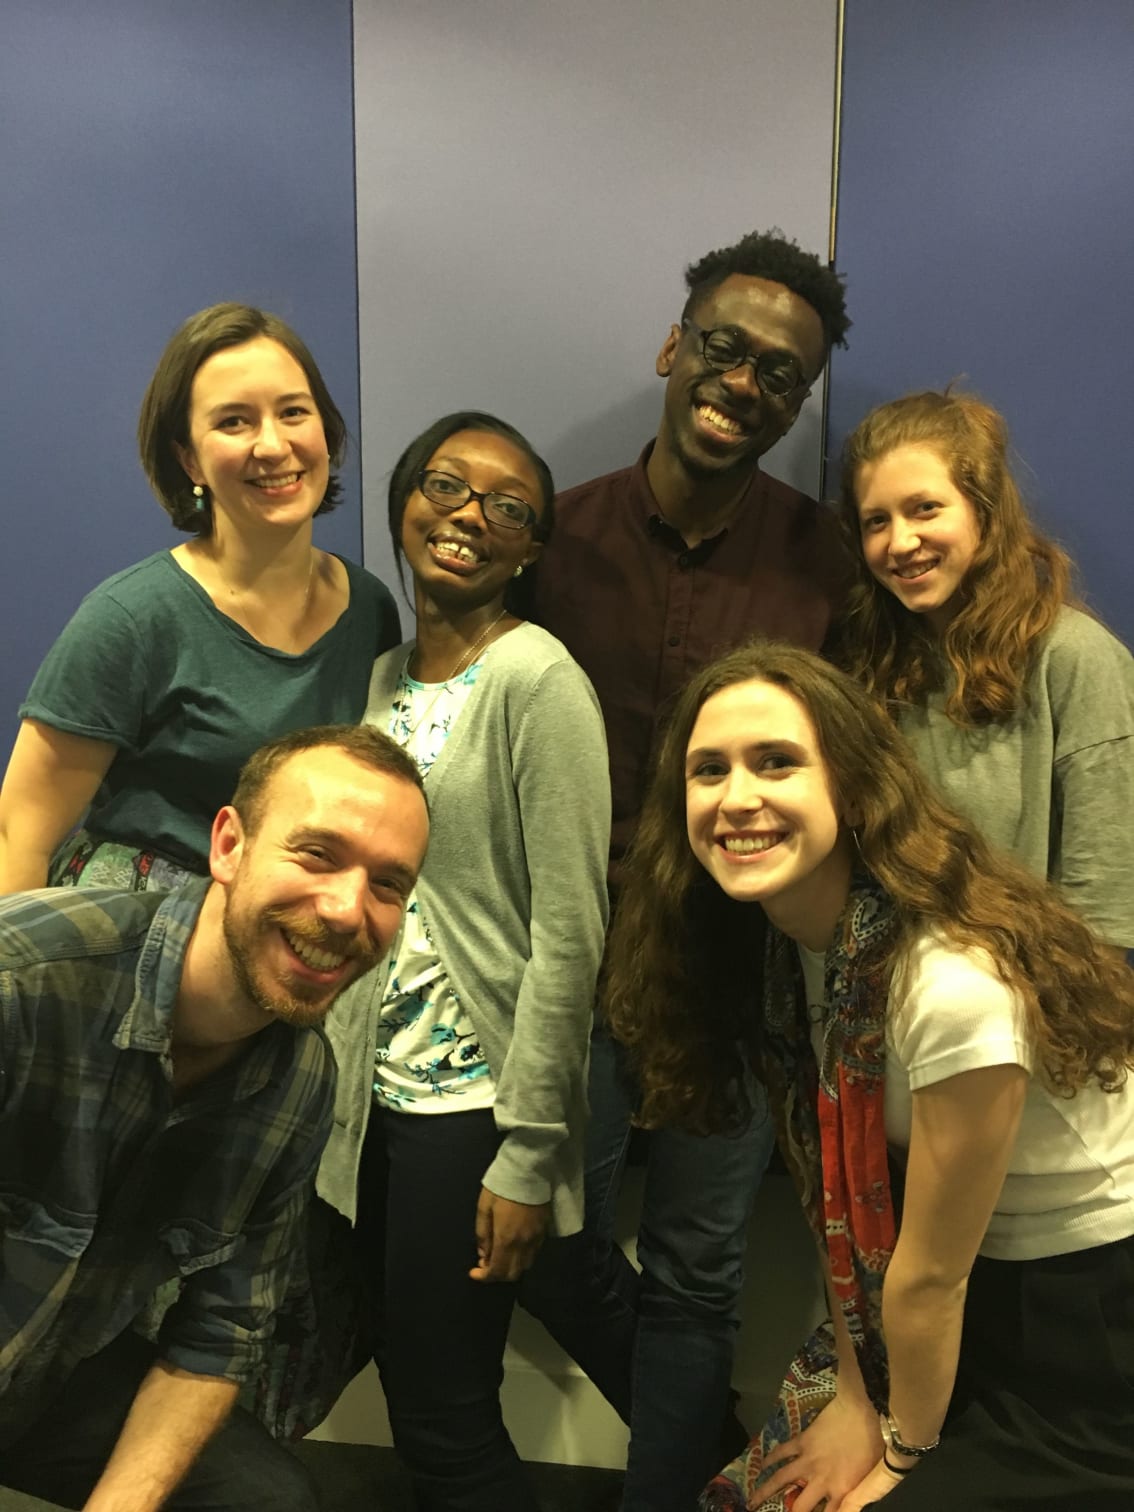 The podcast team. From left to right: Amica Sciortino Nowlan, Louisa Danquah, Axel Kacoutié, Milicia Cortanovacki, Ariel Silverman, Olica Amura. 